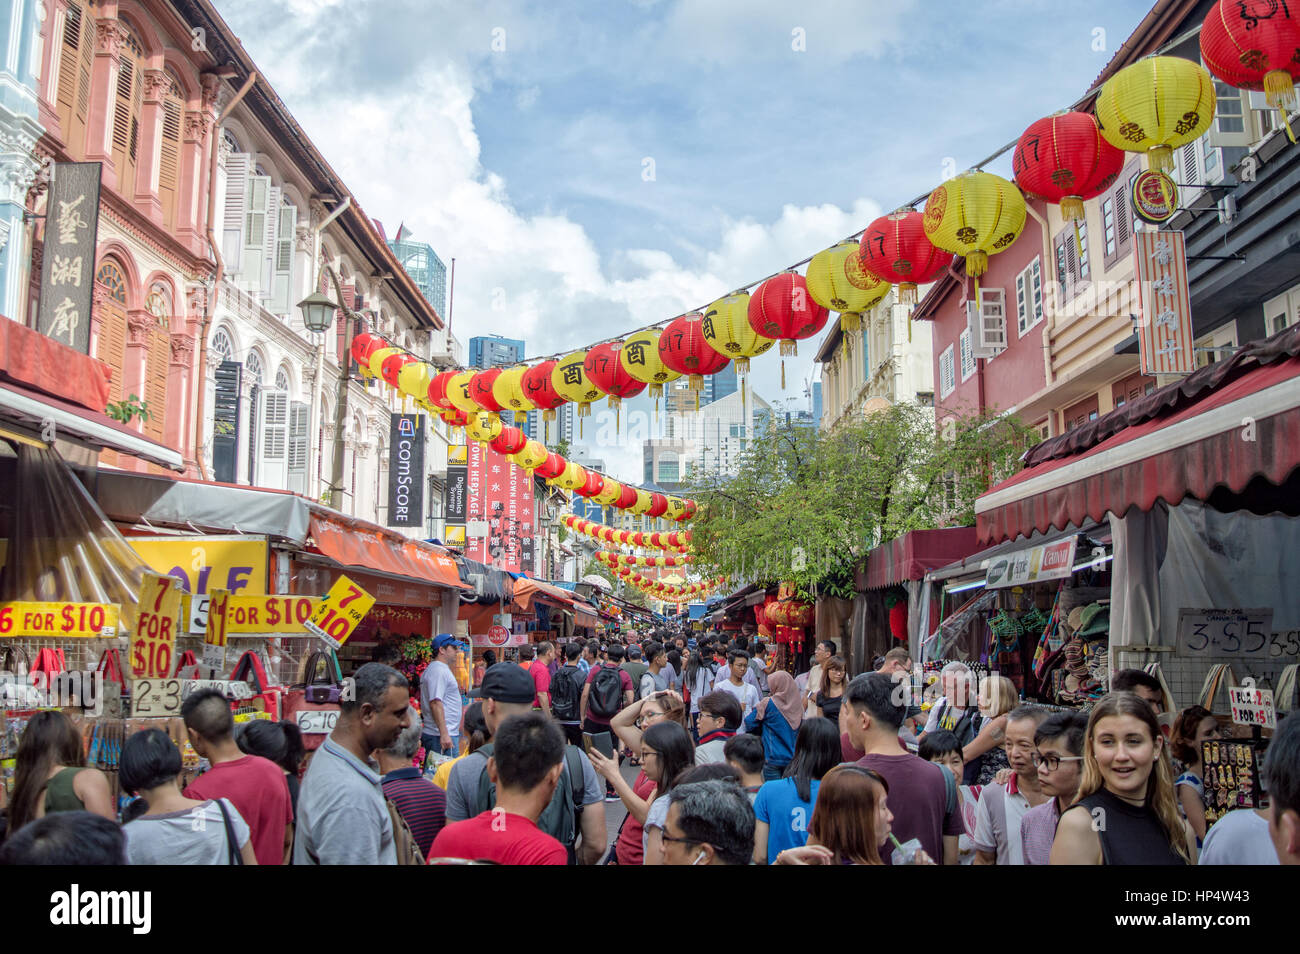 Crowd in a street of Chinatown during chinese new year in Singapore Stock Photo